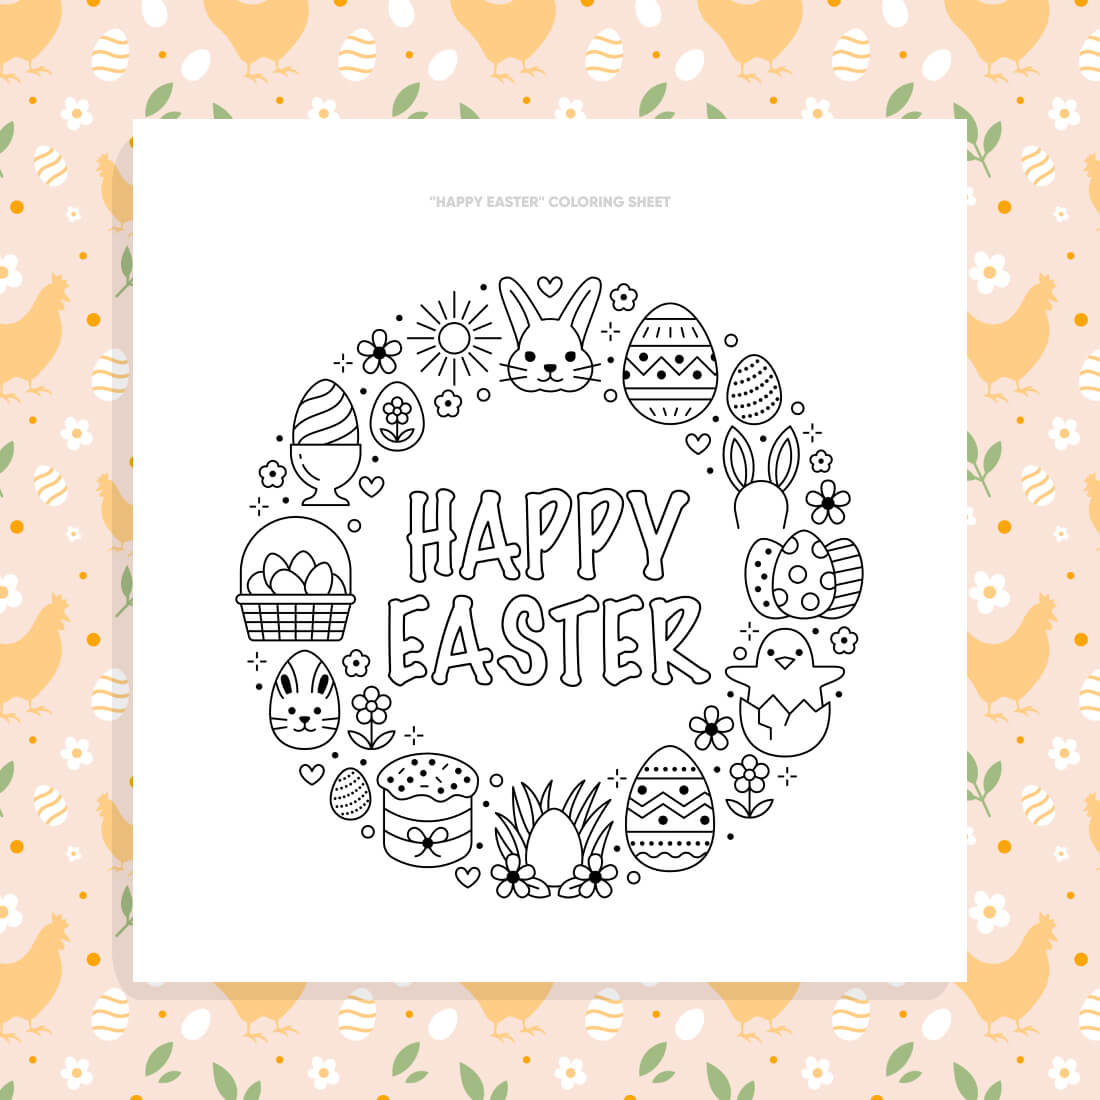 "Happy Easter" Coloring Sheet preview image.